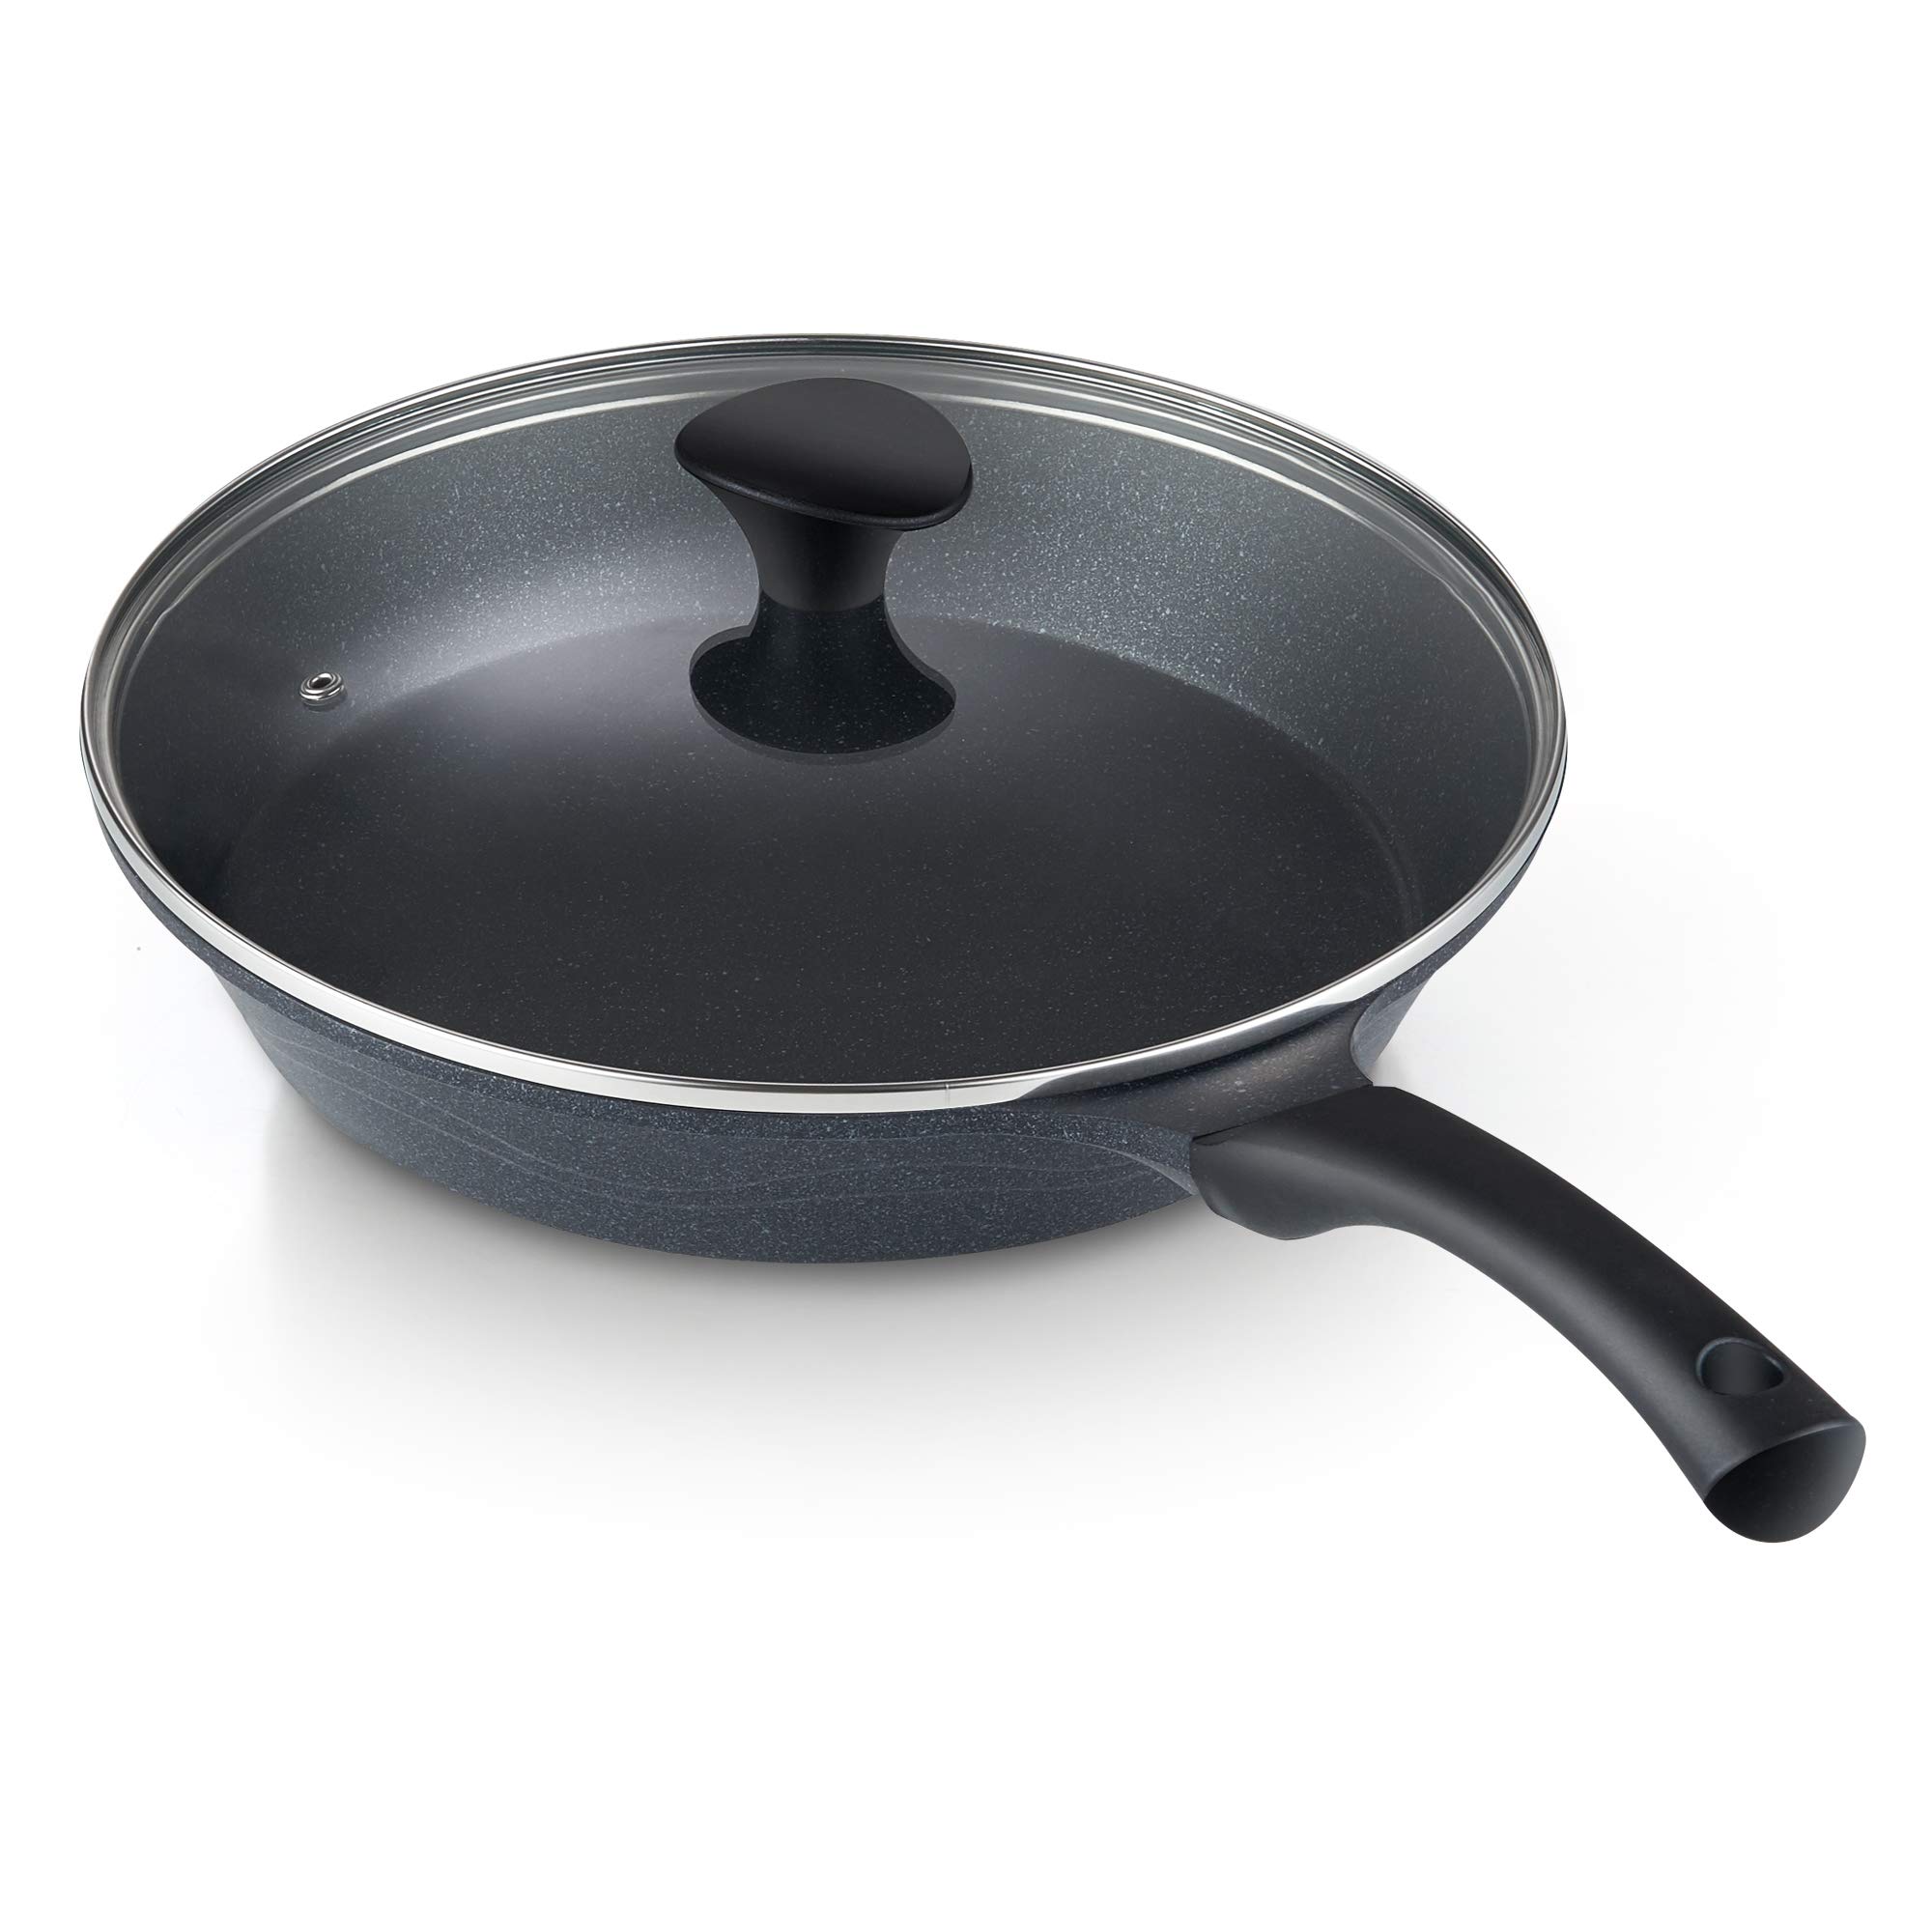 Cook N Home Marble Nonstick Cookware Saute, 10.5 Inch Fry Pan With Lid, Black